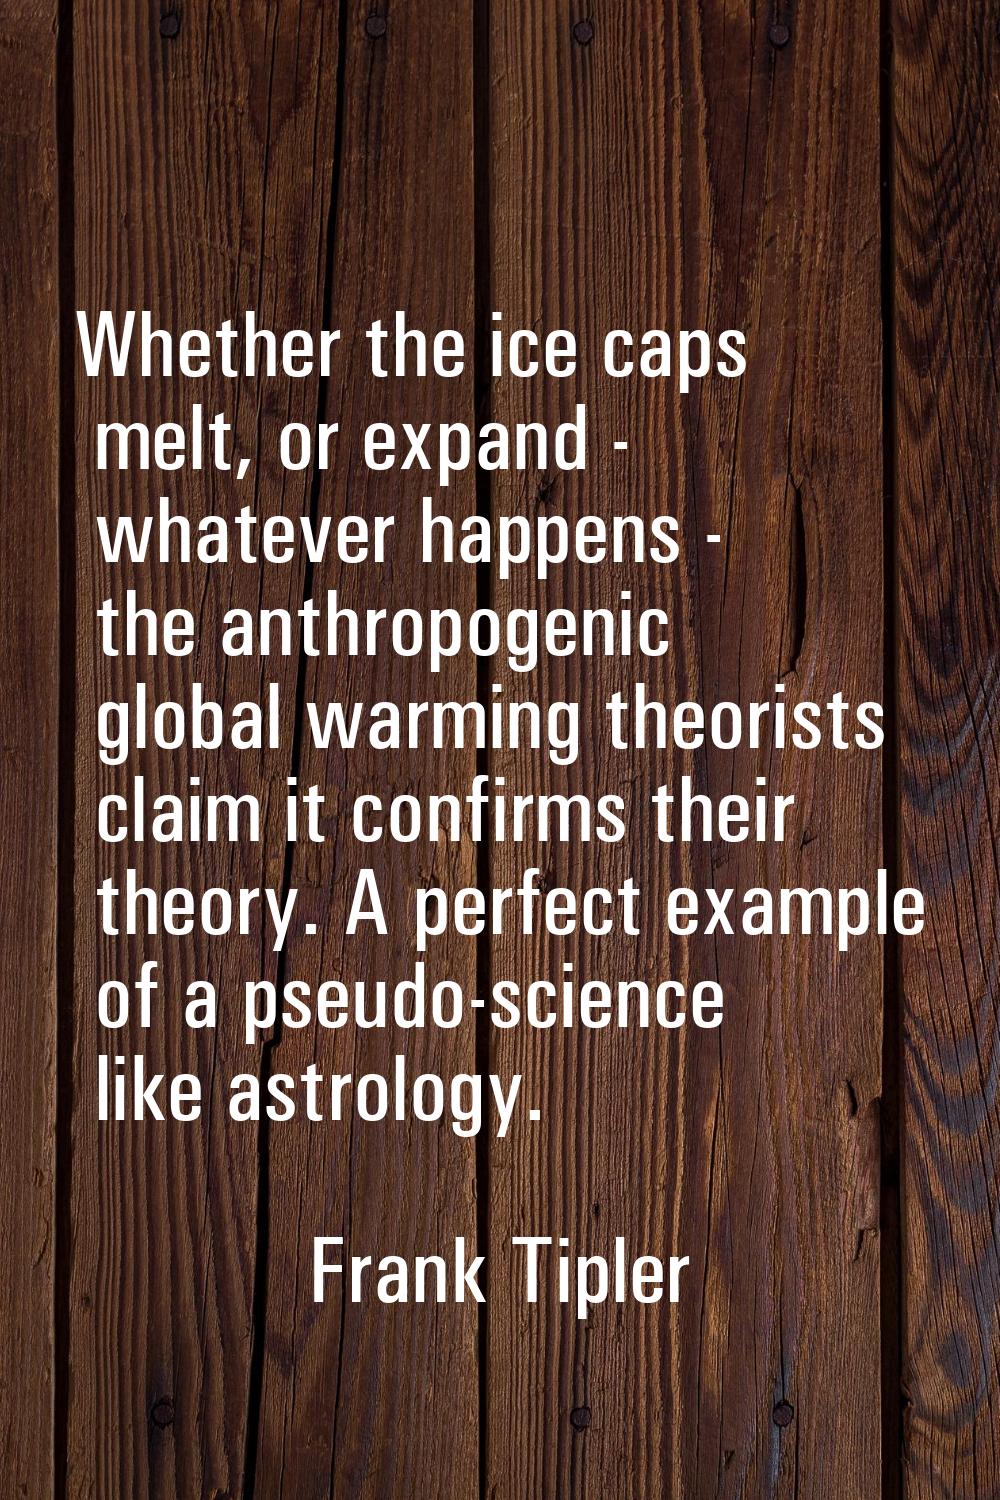 Whether the ice caps melt, or expand - whatever happens - the anthropogenic global warming theorist